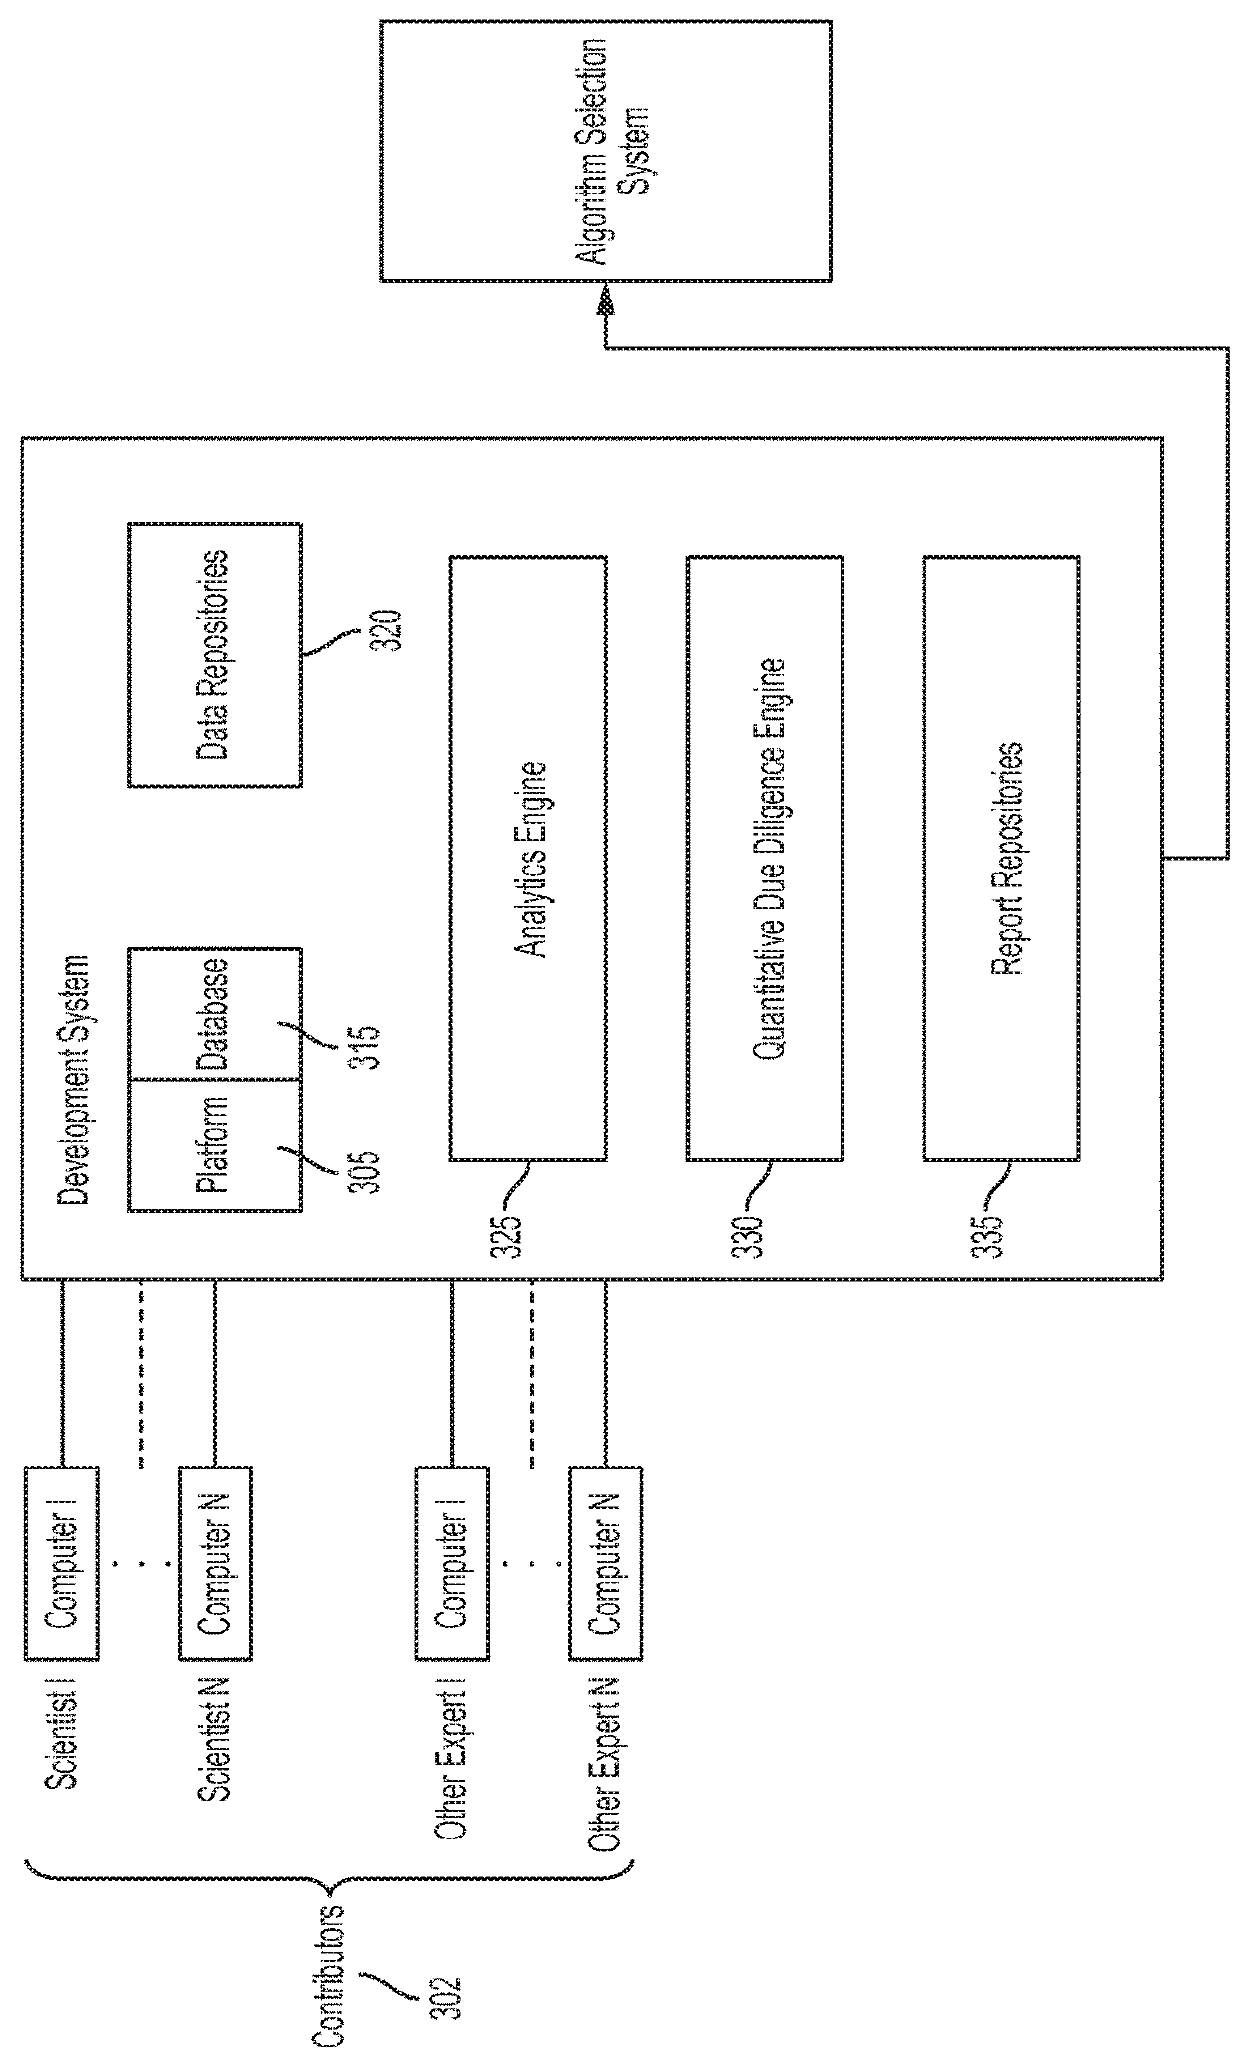 Systems and methods for crowdsourcing of algorithmic forecasting